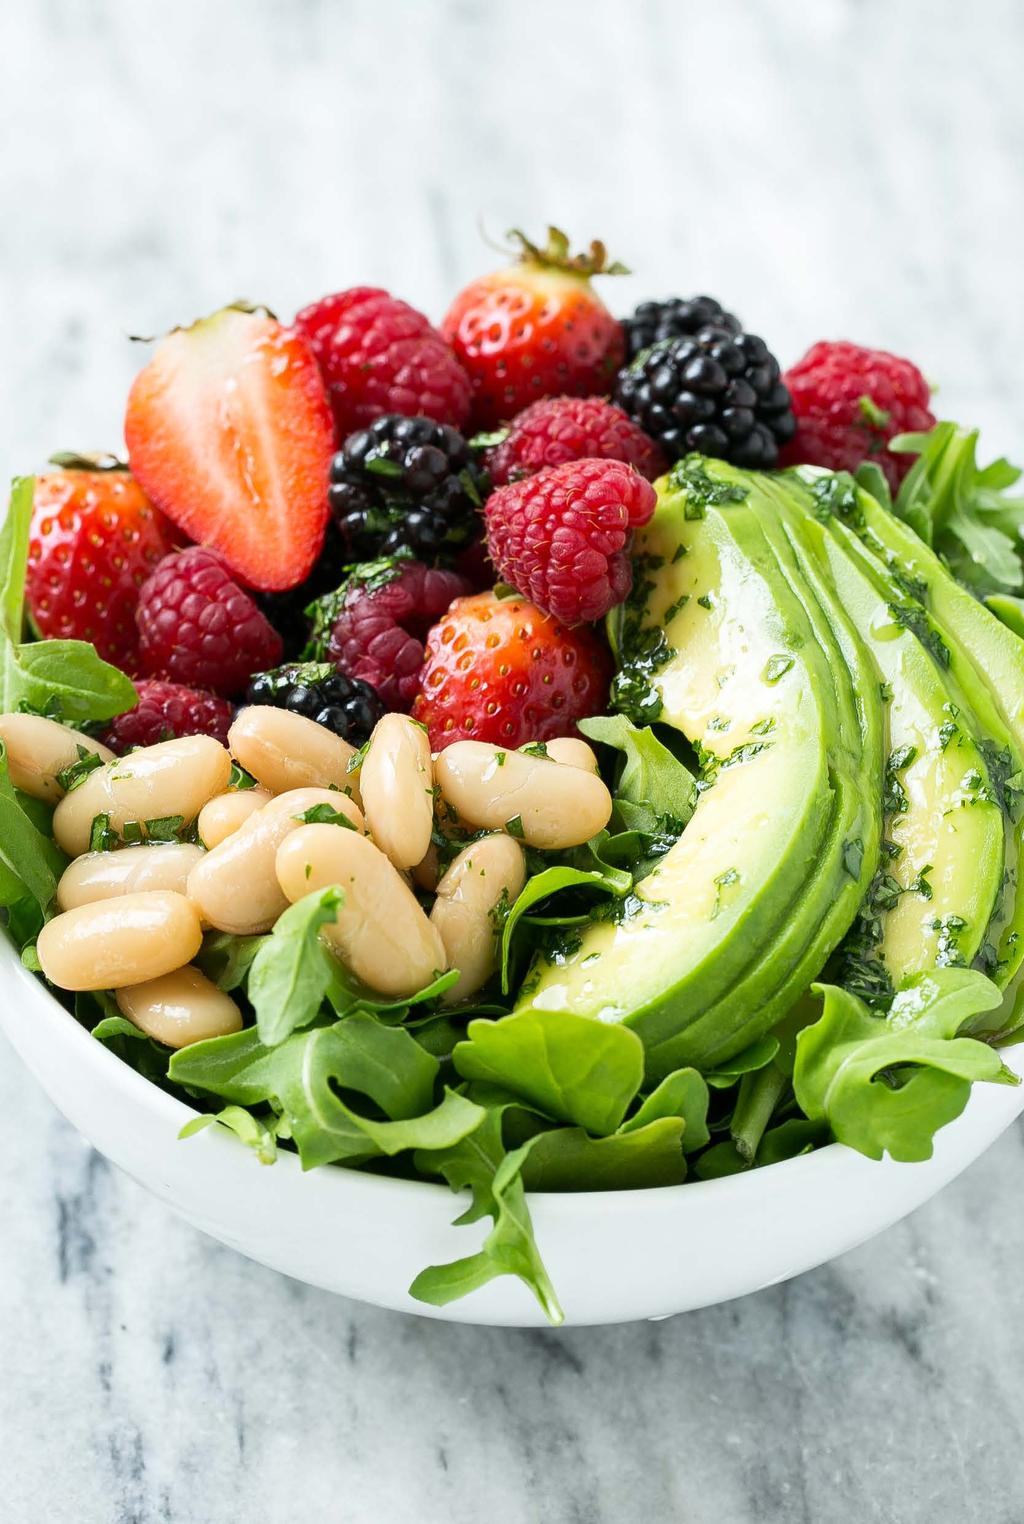 Bowls 17. Summer Salad Bowl Fresh berries, avocado and white beans are combined with arugula and tossed in a cilantro vinaigrette for an easy meal.